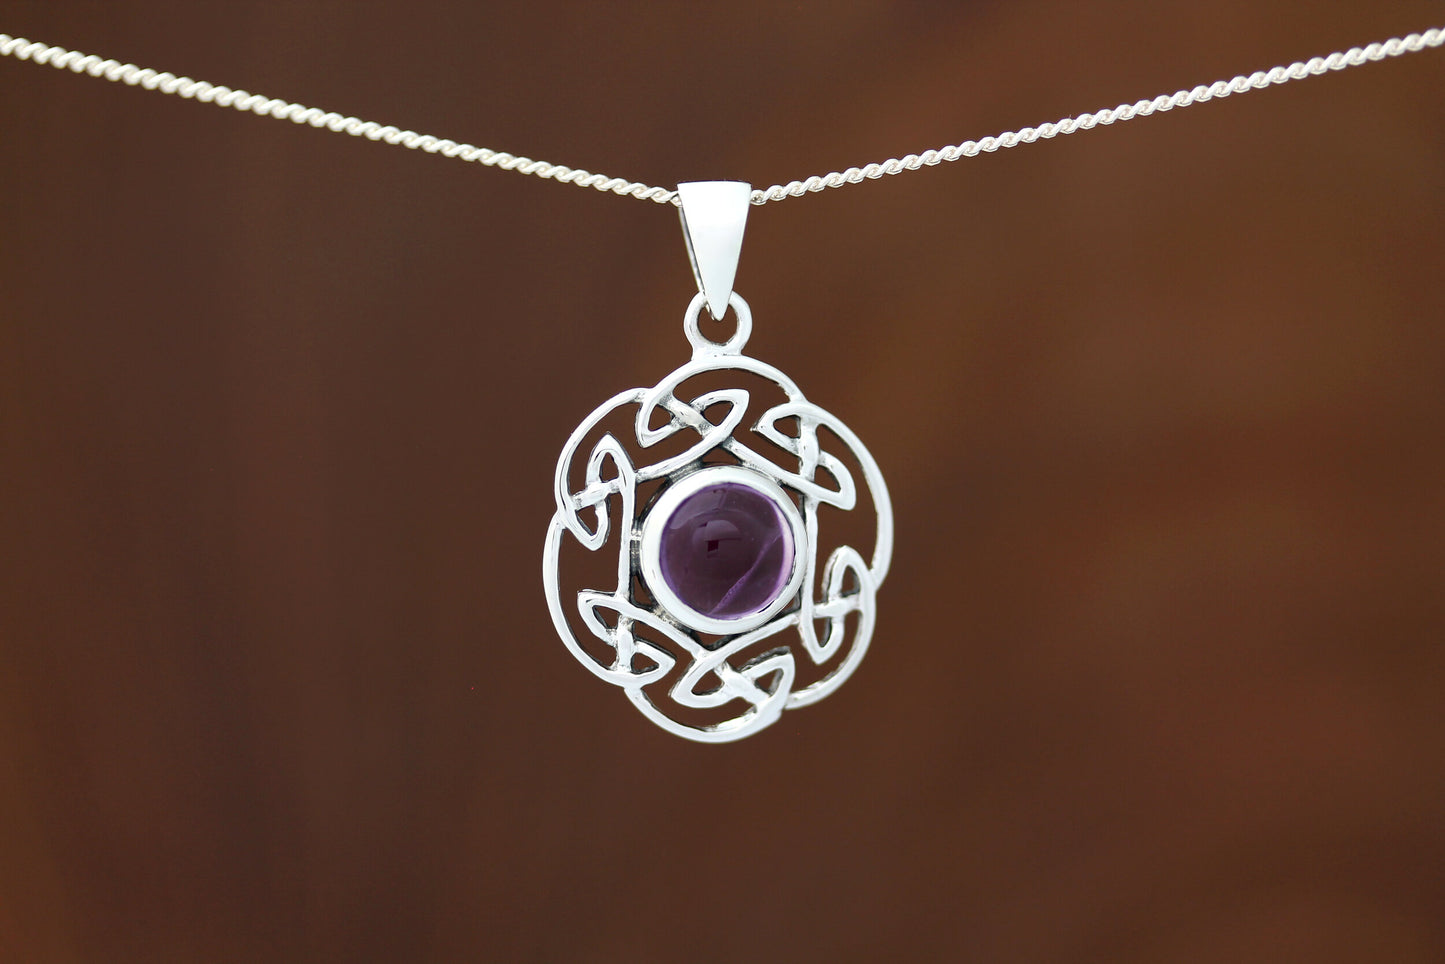 Celtic Stone Pendant - Pictish Knot Border with Amethyst